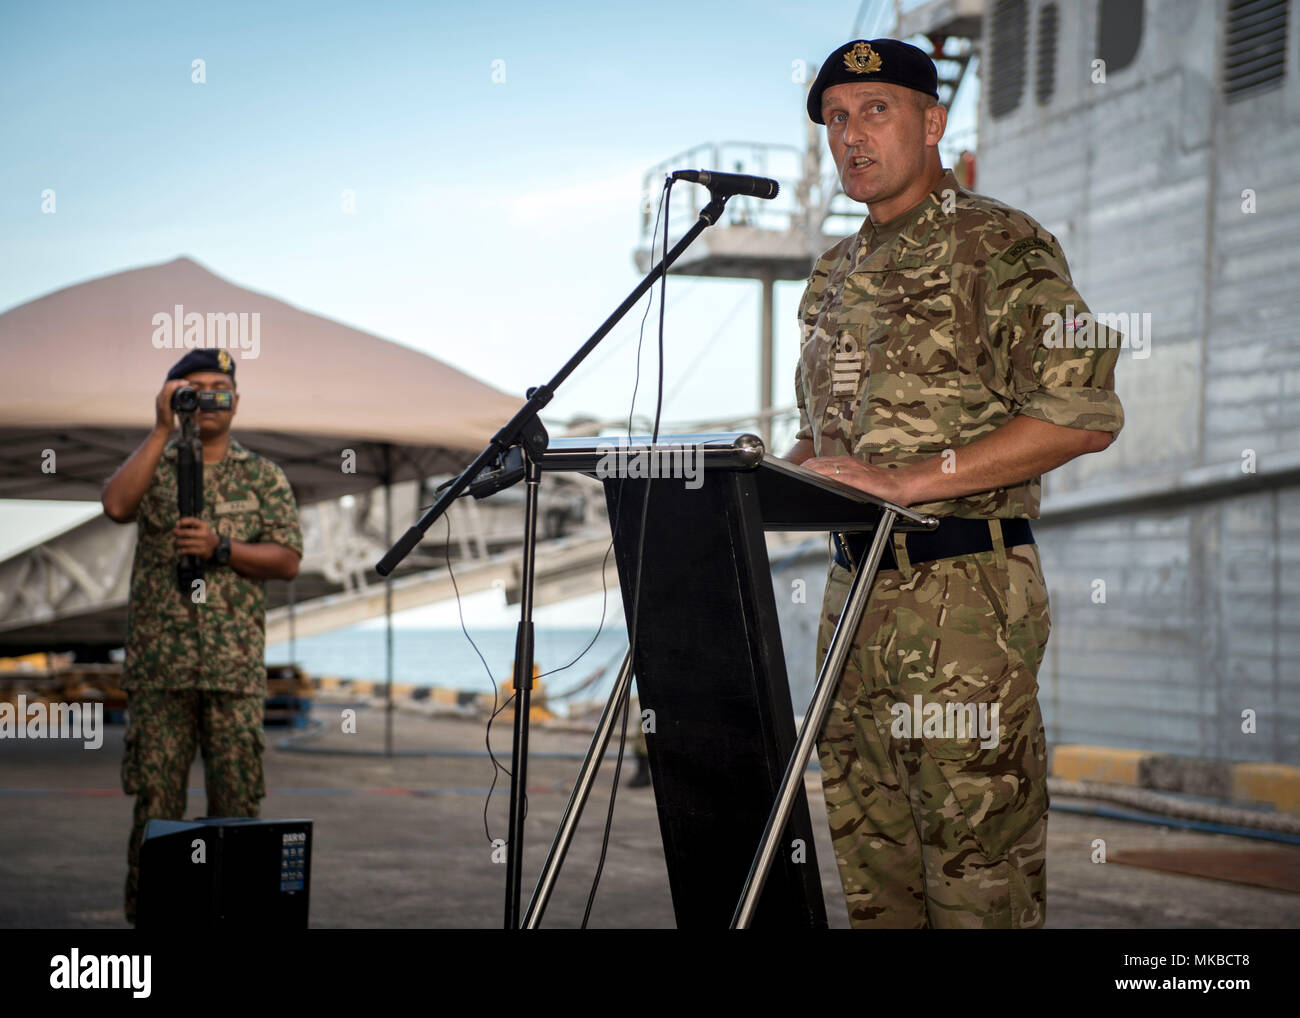 180503-N-MW694-0107 TAWAU, Malaysia (May 3, 2018) Royal Navy Capt. Peter Olive, Pacific Partnership 2018 (PP18) Deputy Mission Commander, speaks during the PP18 Tawau mission stop closing ceremony, May 3. PP18’s mission is to work collectively with host and partner nations to enhance regional interoperability and disaster response capabilities, increase stability and security in the region, and foster new and enduring friendships across the Indo-Pacific Region. Pacific Partnership, now in its 13th iteration, is the largest annual multinational humanitarian assistance and disaster relief prepar Stock Photo